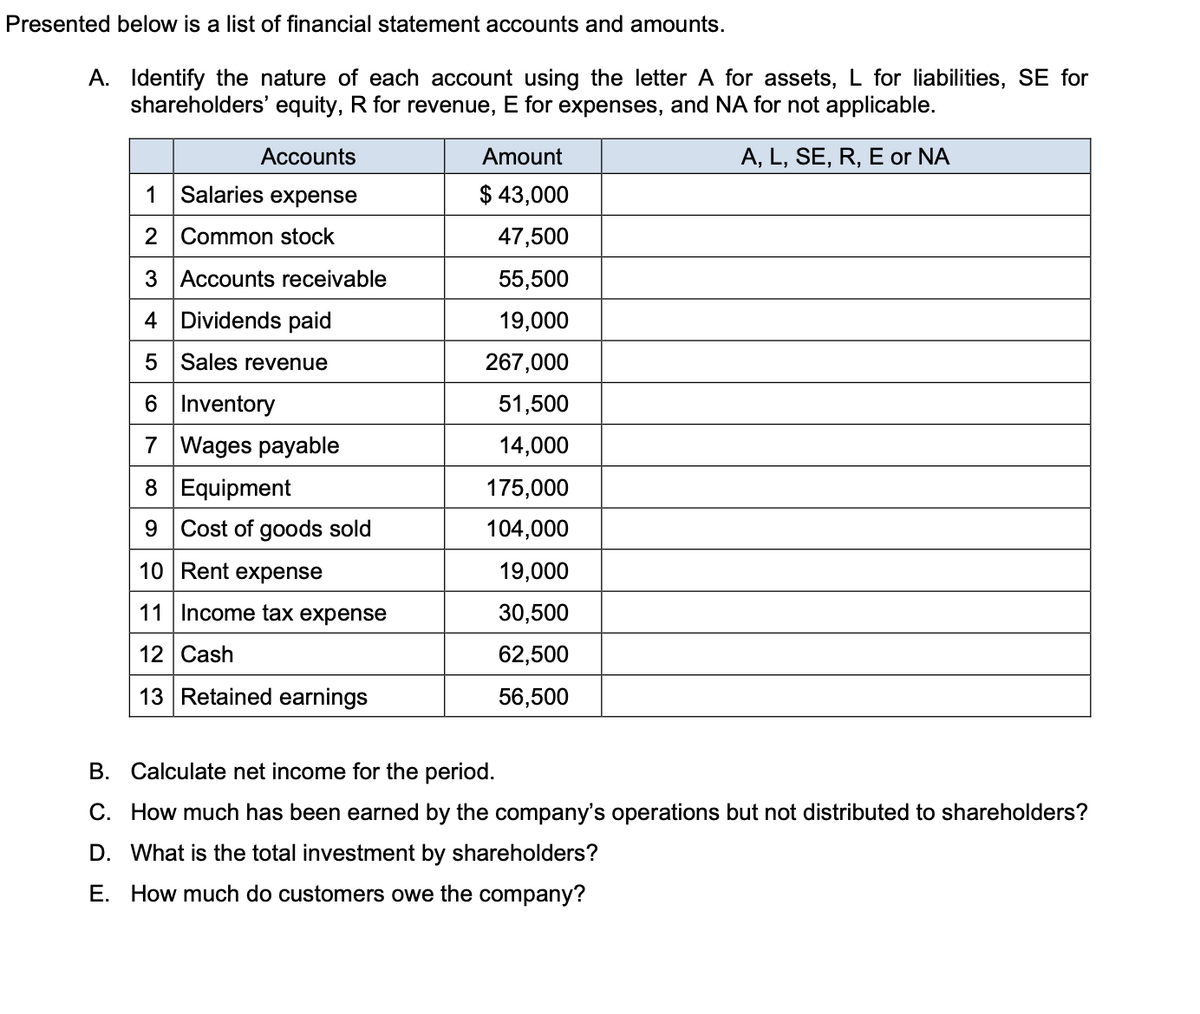 Presented below is a list of financial statement accounts and amounts.
A. Identify the nature of each account using the letter A for assets, L for liabilities, SE for
shareholders' equity, R for revenue, E for expenses, and NA for not applicable.
Accounts
Amount
A, L, SE, R, E or NA
1 Salaries expense
$ 43,000
2 Common stock
47,500
3 Accounts receivable
55,500
4 Dividends paid
19,000
5 Sales revenue
267,000
6 Inventory
51,500
7 Wages payable
8 Equipment
14,000
175,000
9 Cost of goods sold
104,000
10 Rent expense
19,000
11 Income tax expense
30,500
12 Cash
62,500
13 Retained earnings
56,500
B. Calculate net income for the period.
C. How much has been earned by the company's operations but not distributed to shareholders?
D. What is the total investment by shareholders?
E. How much do customers owe the company?
